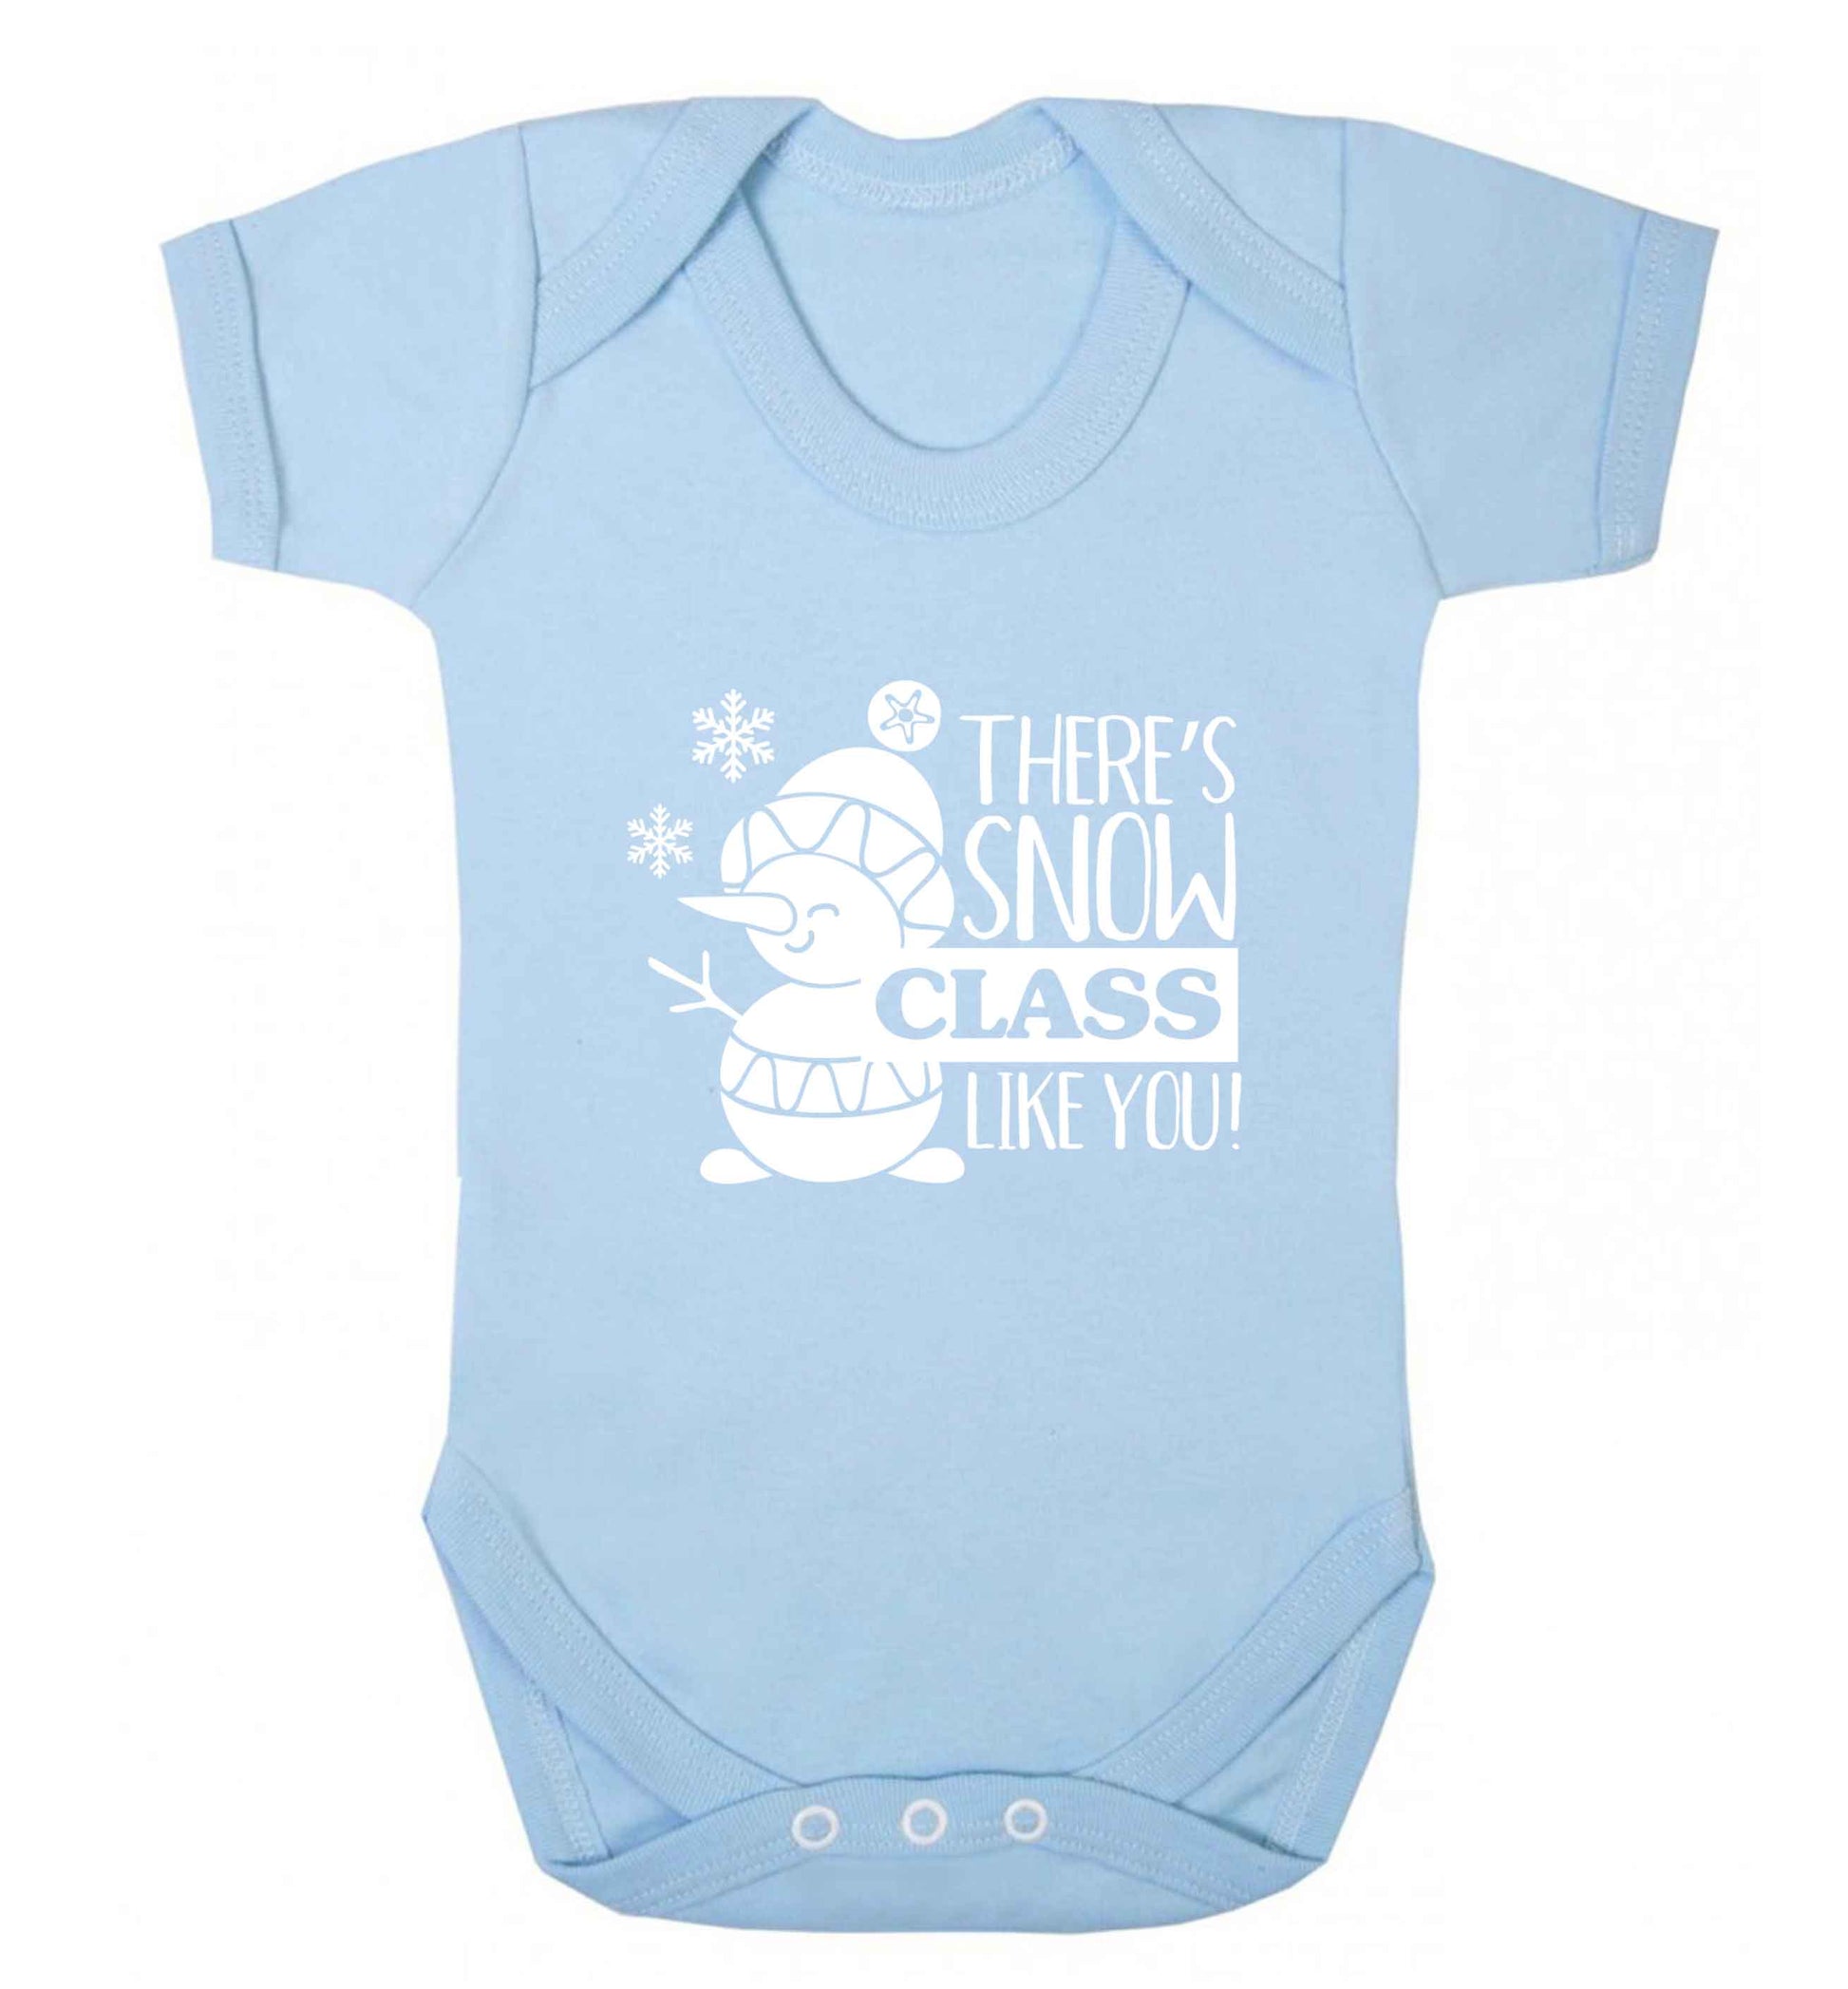 There's snow class like you baby vest pale blue 18-24 months